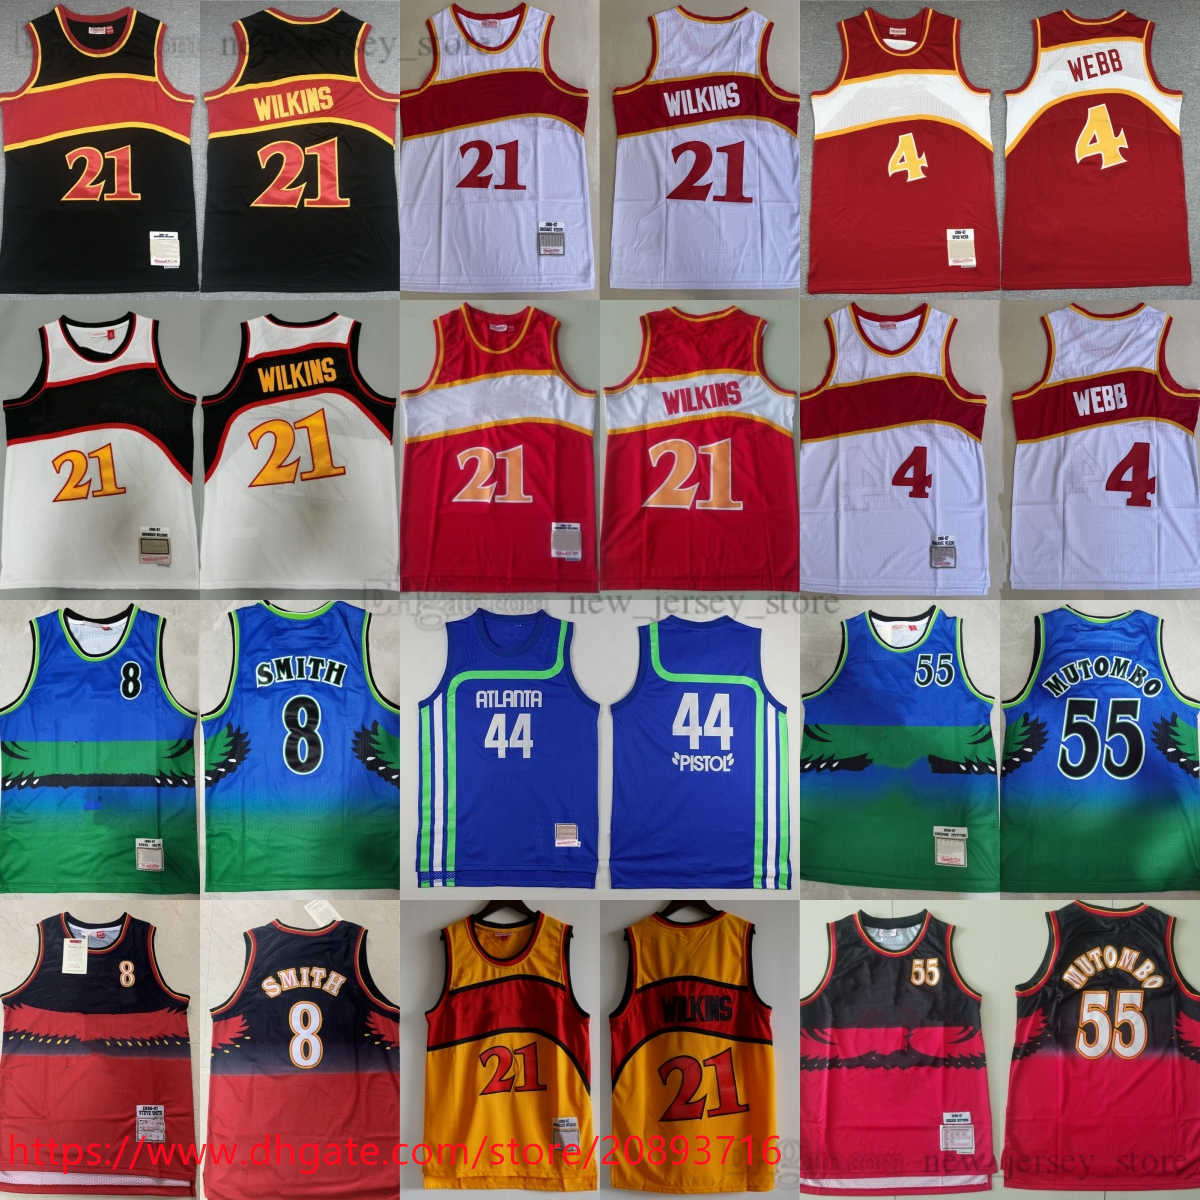 

Mitchell and Ness 1996-97 Basketball 55 Dikembe Mutombo Jerseys Retro Stitched 4 Spud Webb Steve Smith 44 Pistol Pete Maravich Green Black Red White Yellow Jersey, As picture (with team logo)